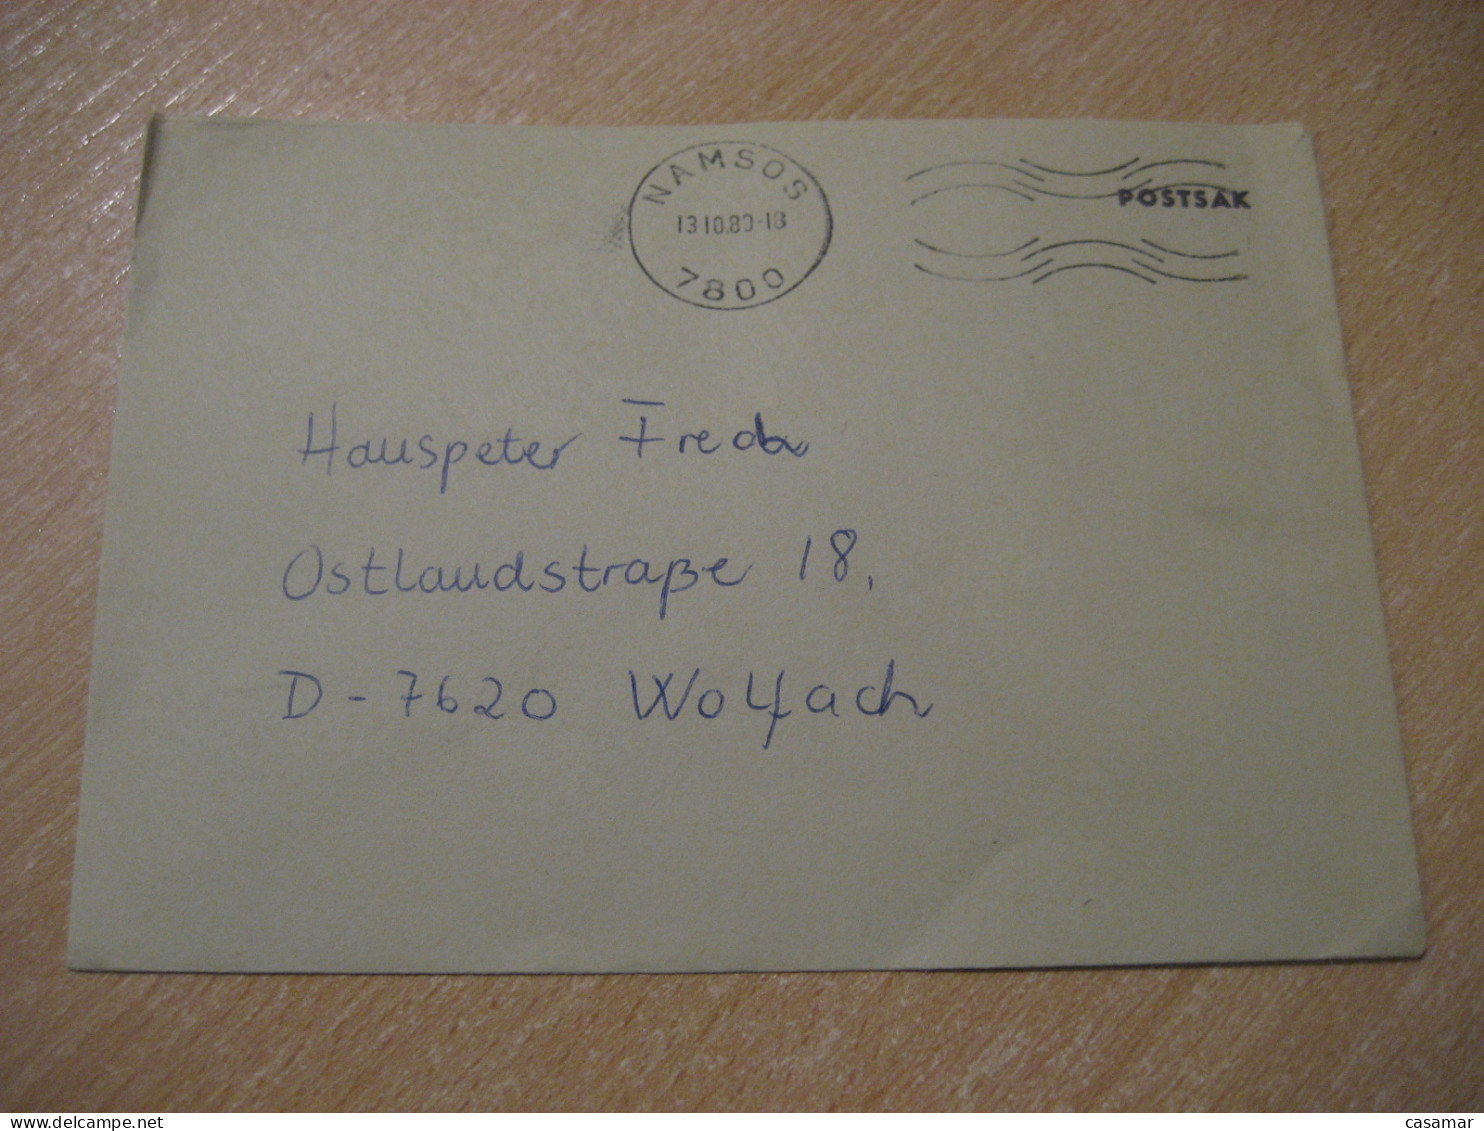 NAMSOS 1980 To Wolfach Postage Paid Cancel Cover NORWAY - Briefe U. Dokumente